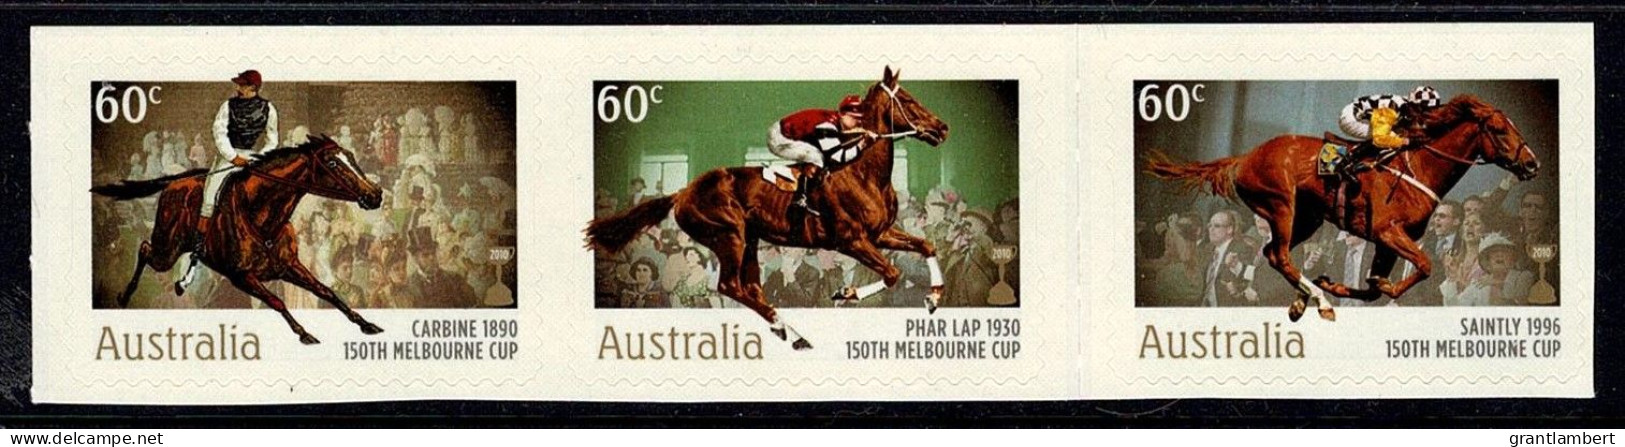 Australia 2010 Melbourne Cup Horses - Strip Of 3 Self-adhesives MNH - Ungebraucht